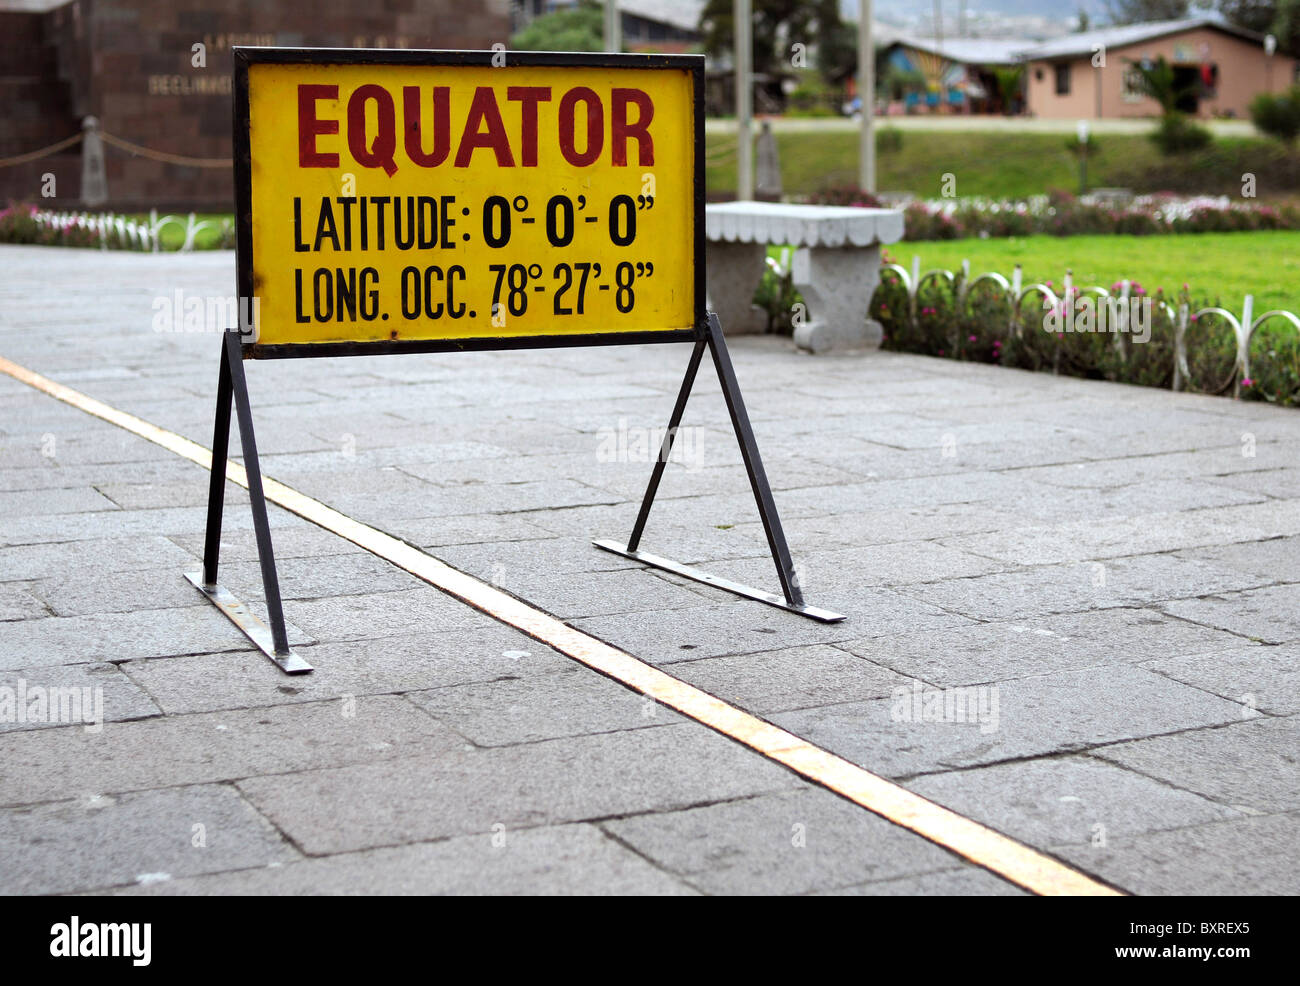 Equator line marked on the ground in the park 'Mitad del Mundo' (middle of the world) near Quito, the capital of Ecuador. Stock Photo